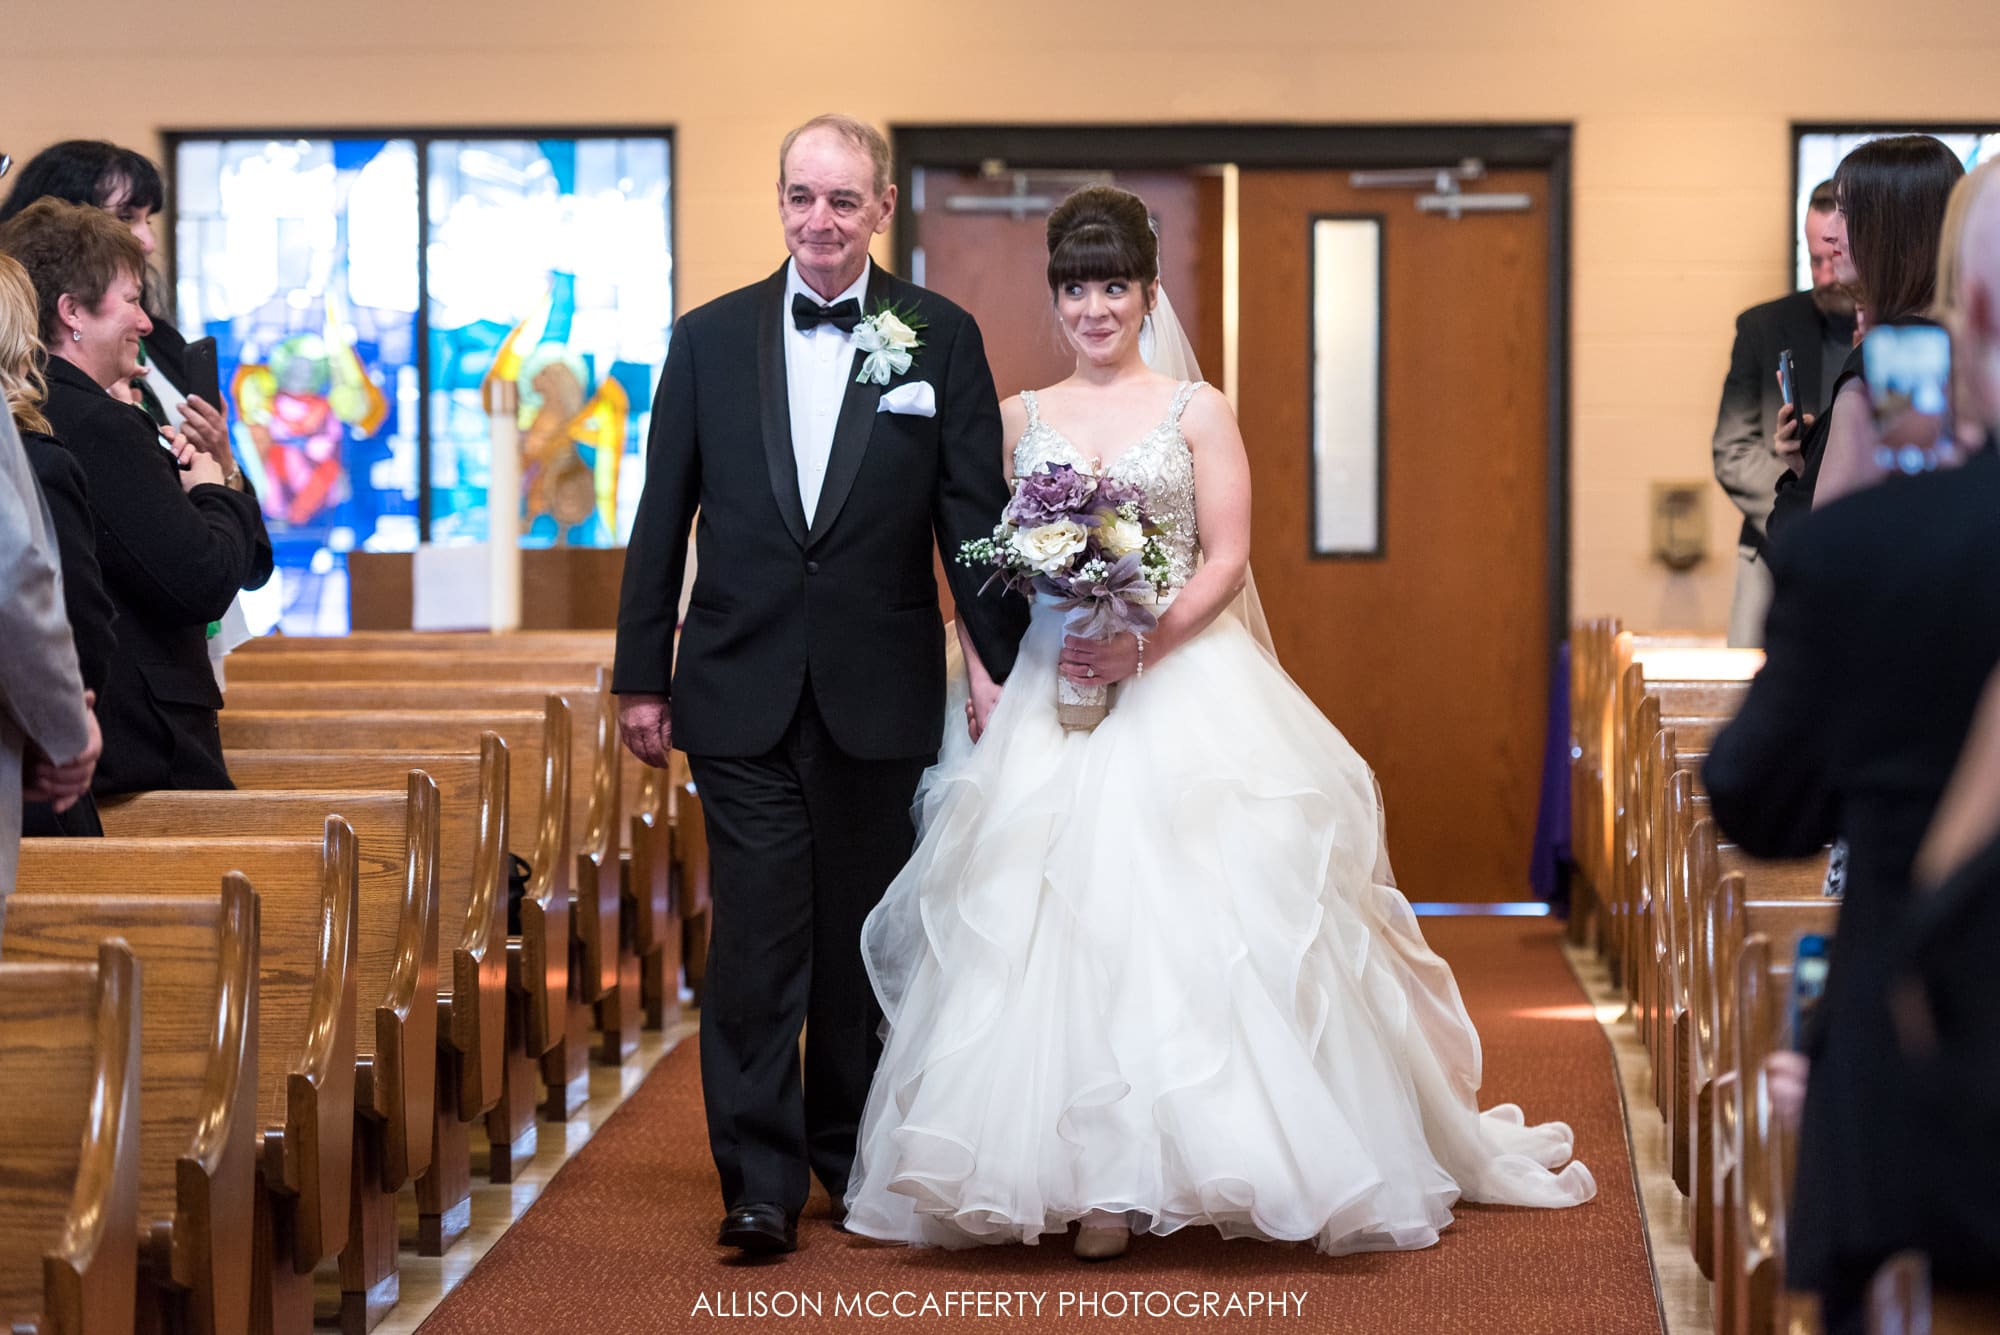 Bride walking down the aisle with her Dad